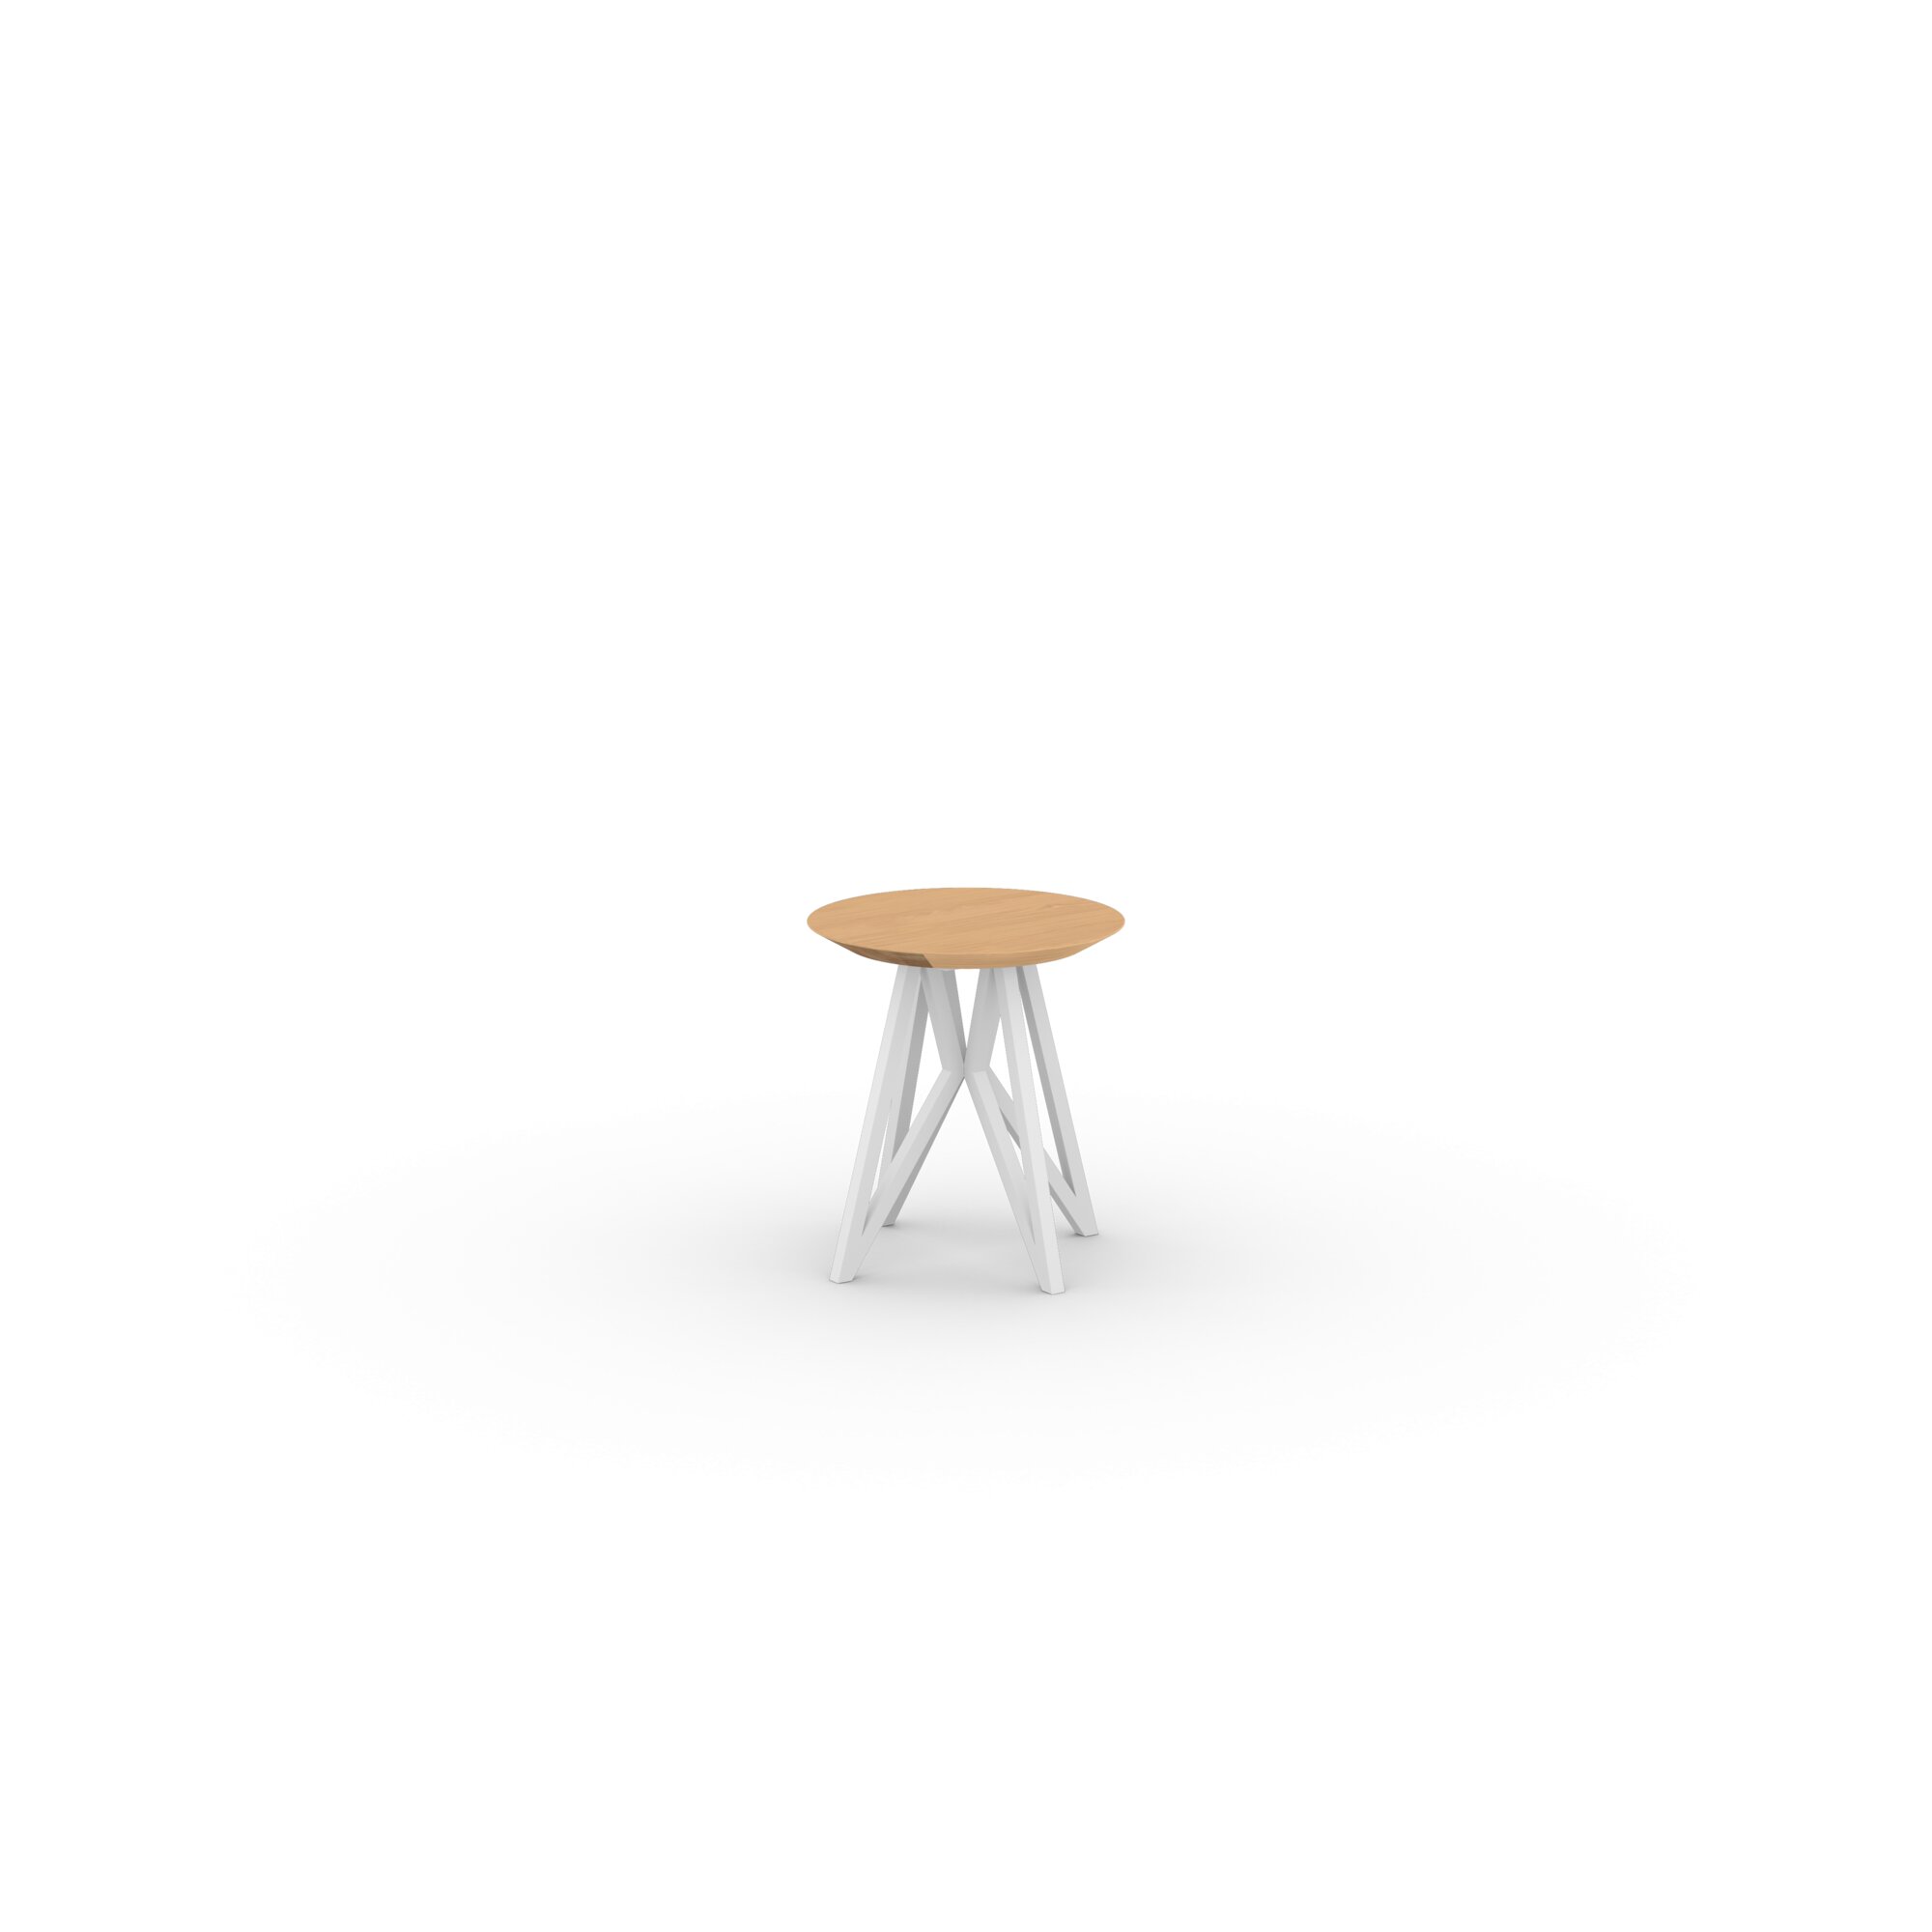 Design Coffee Table | Butterfly Quadpod Coffee Table White | Oak hardwax oil natural 3062 | Studio HENK| 